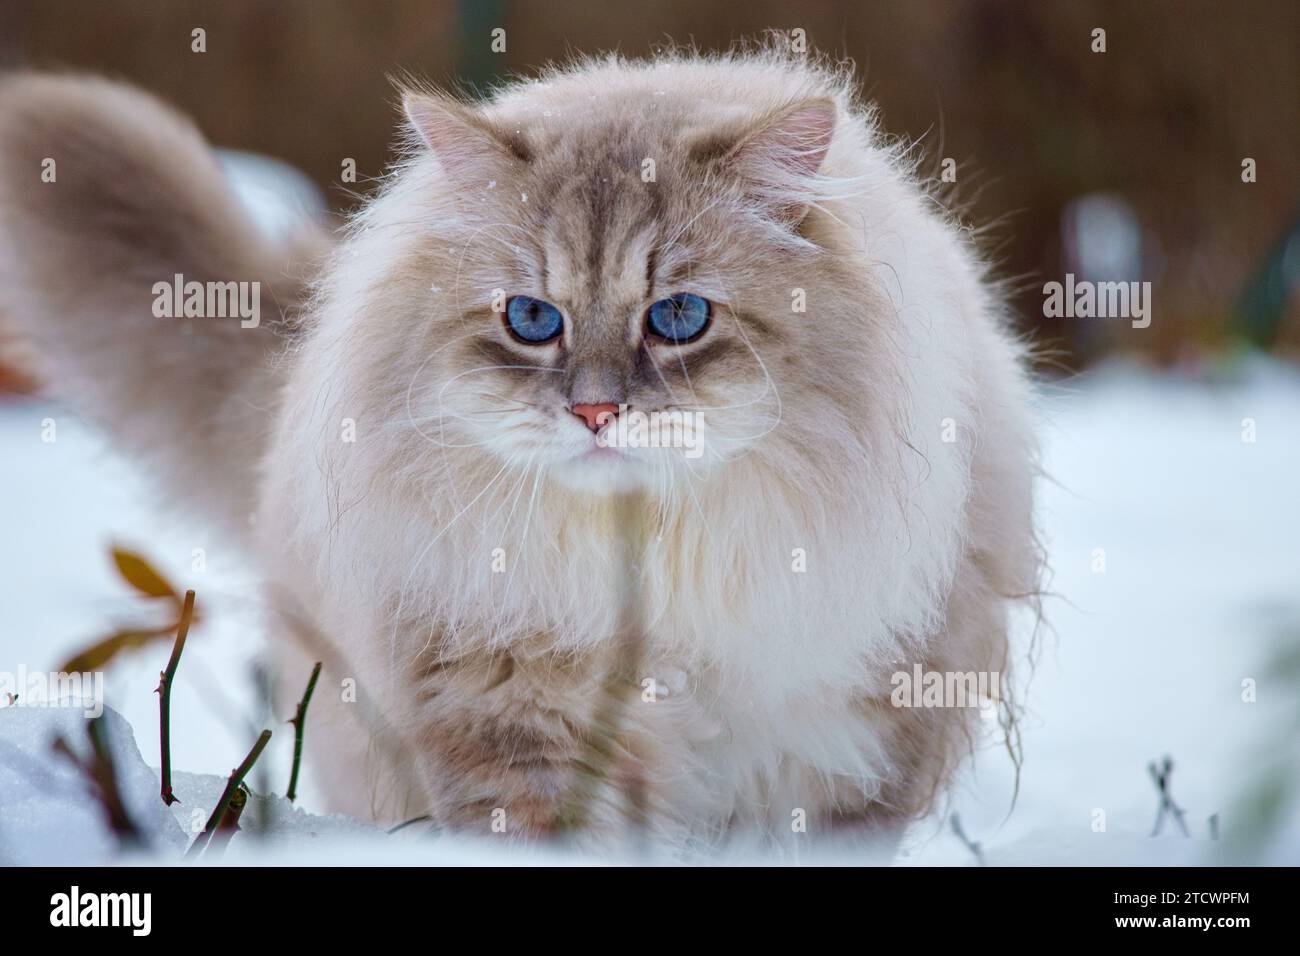 Cat of the Neva masquerade with blue eyes in the snow. Stock Photo